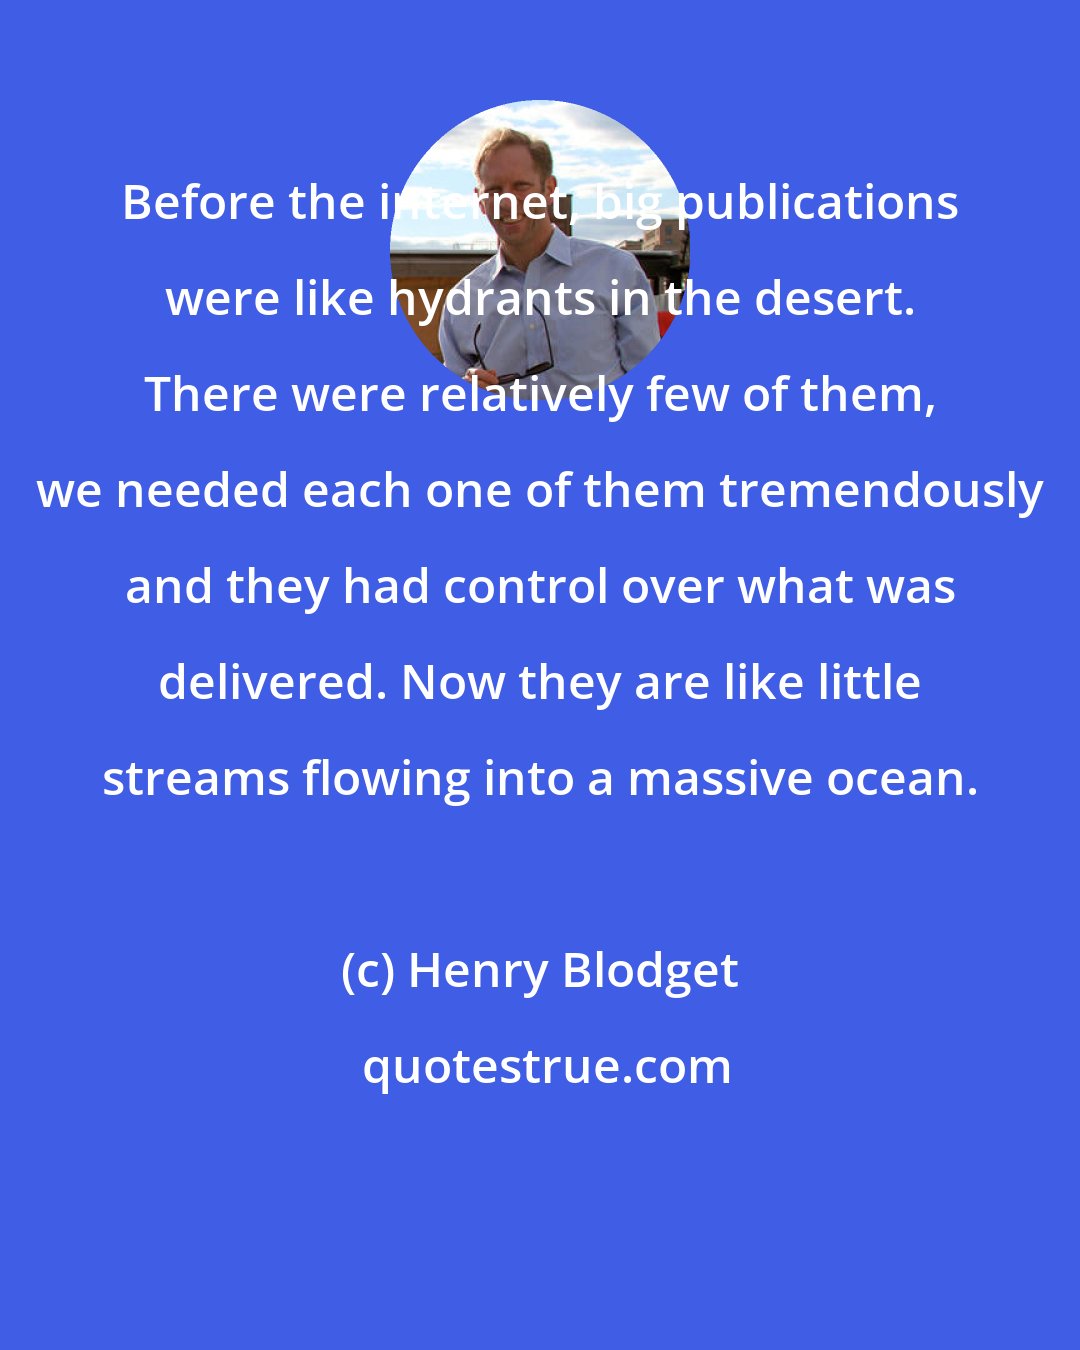 Henry Blodget: Before the internet, big publications were like hydrants in the desert. There were relatively few of them, we needed each one of them tremendously and they had control over what was delivered. Now they are like little streams flowing into a massive ocean.